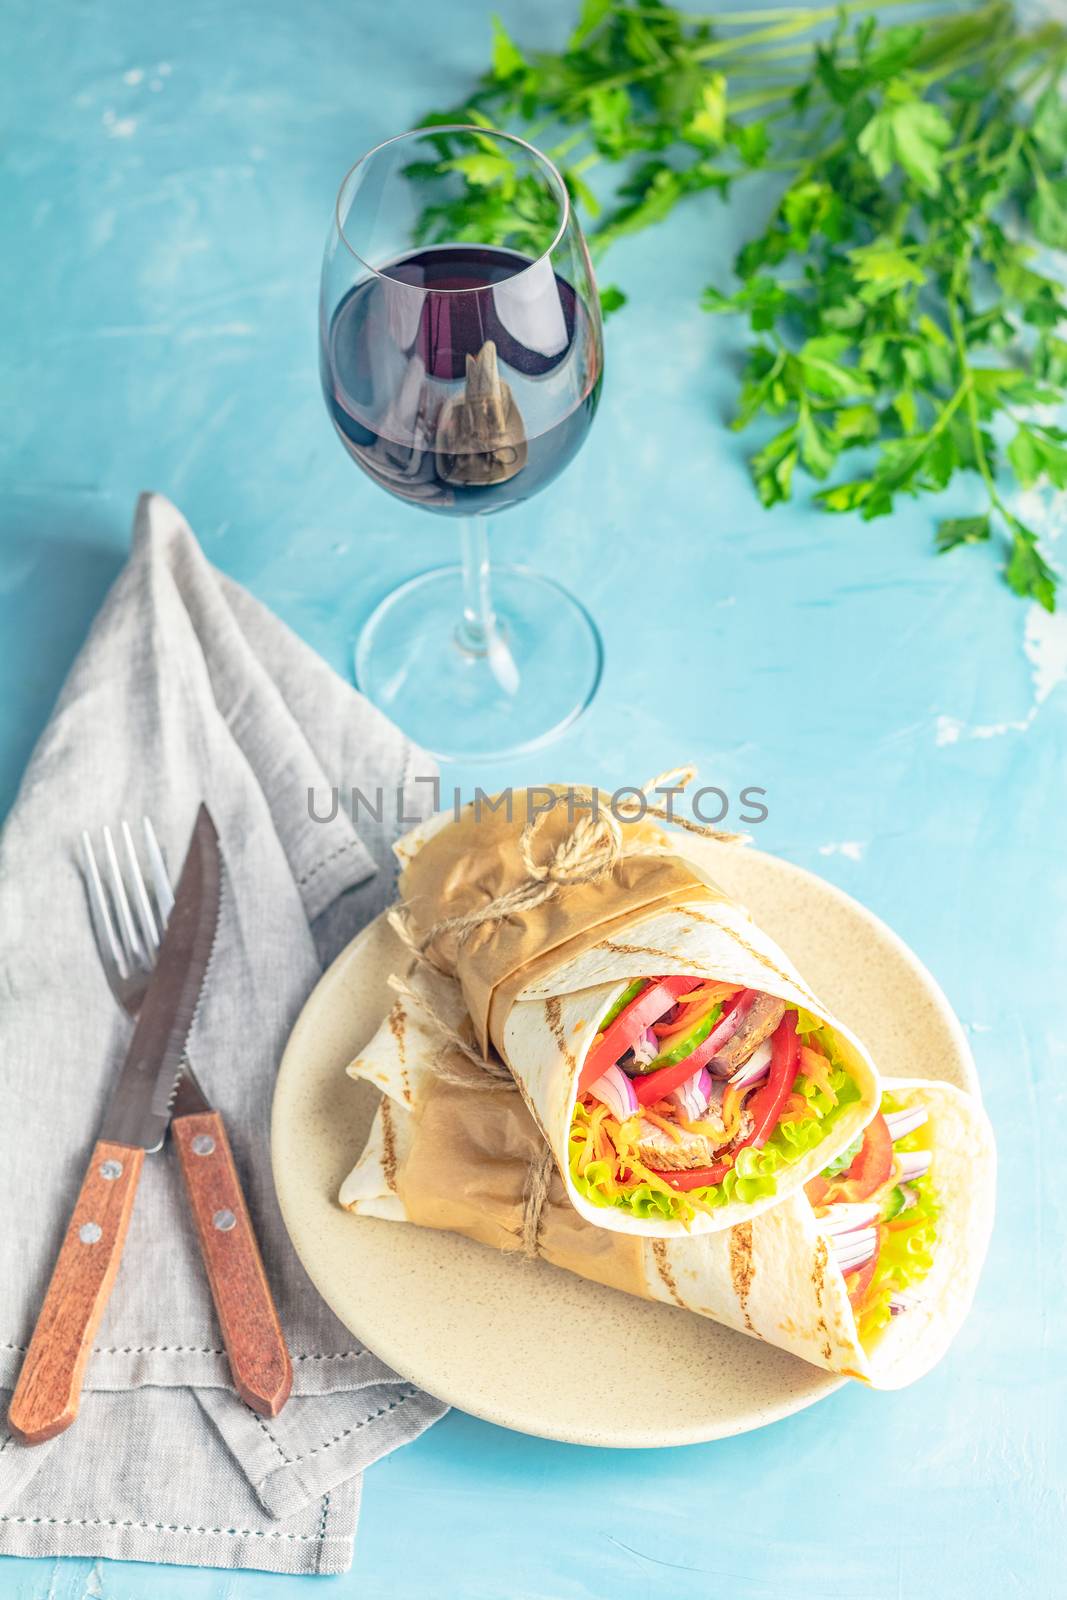 Shawarma sandwich gyro fresh roll of lavash (pita bread) chicken beef shawarma falafel RecipeTin Eats Filled with grilled meat, vegetables, cheese. Traditional Middle Eastern snack served with wine